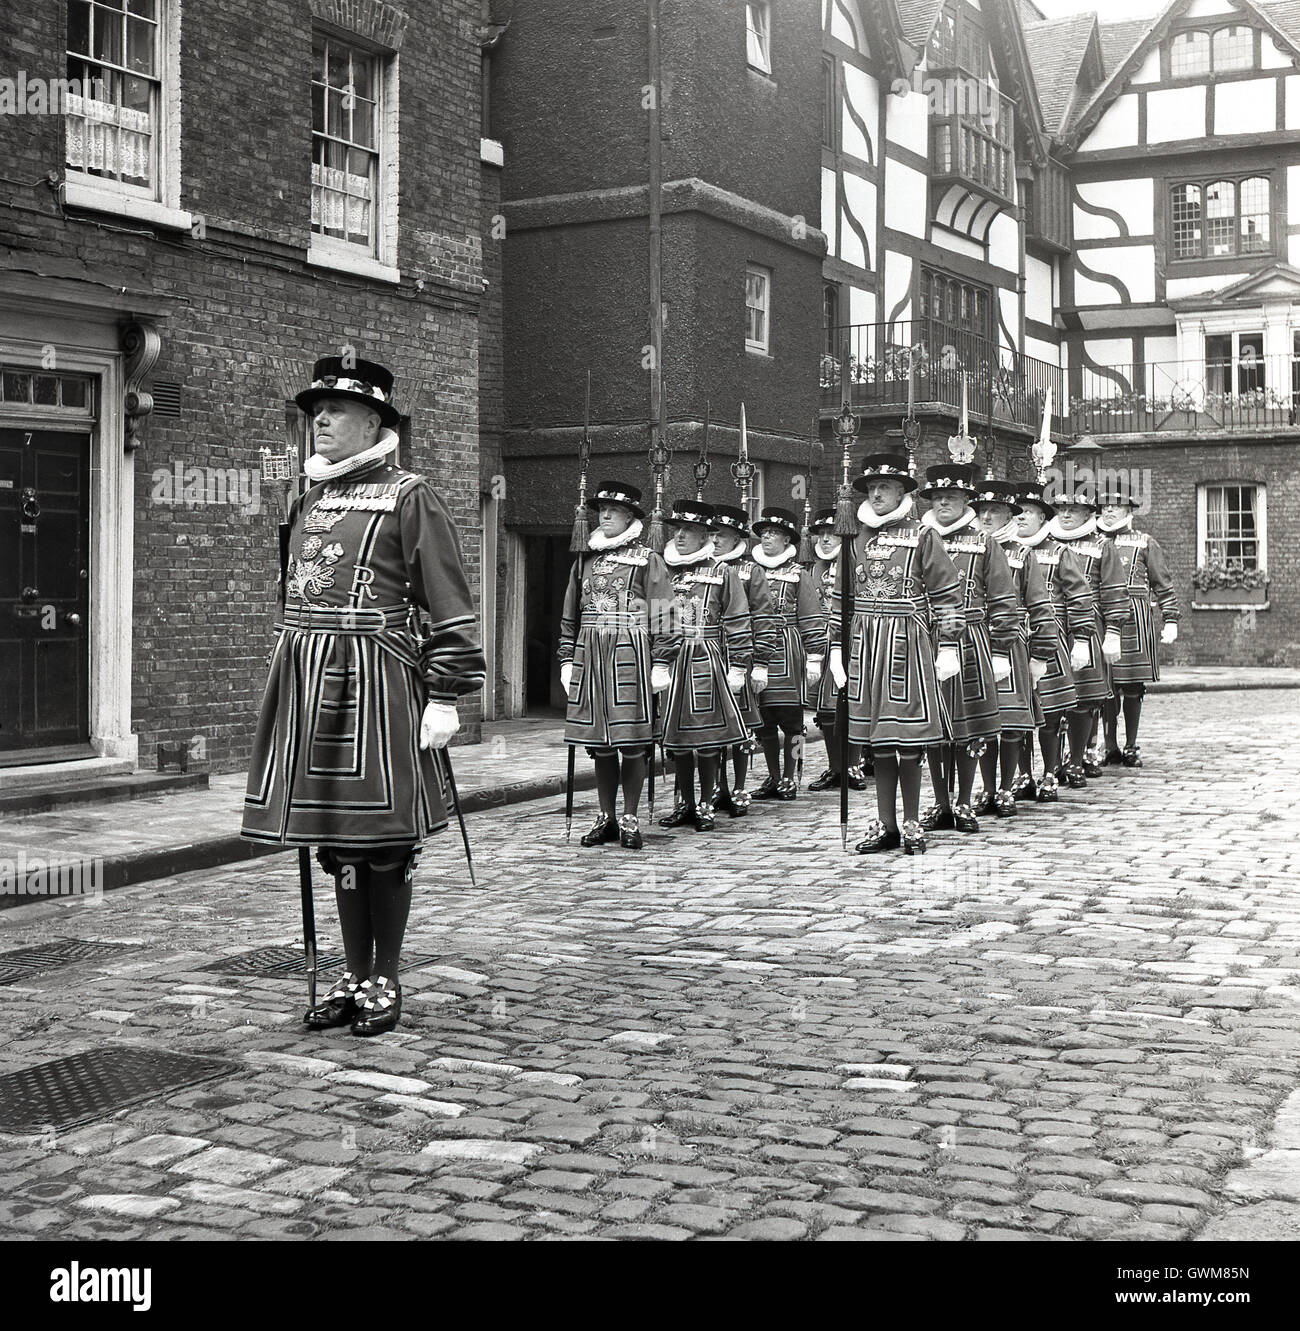 1950s historical, line-up of Yeomen Warders of Her Majesty's Royal Palace and Fortress the Tower of London, popularly known as Beefeaters. Stock Photo